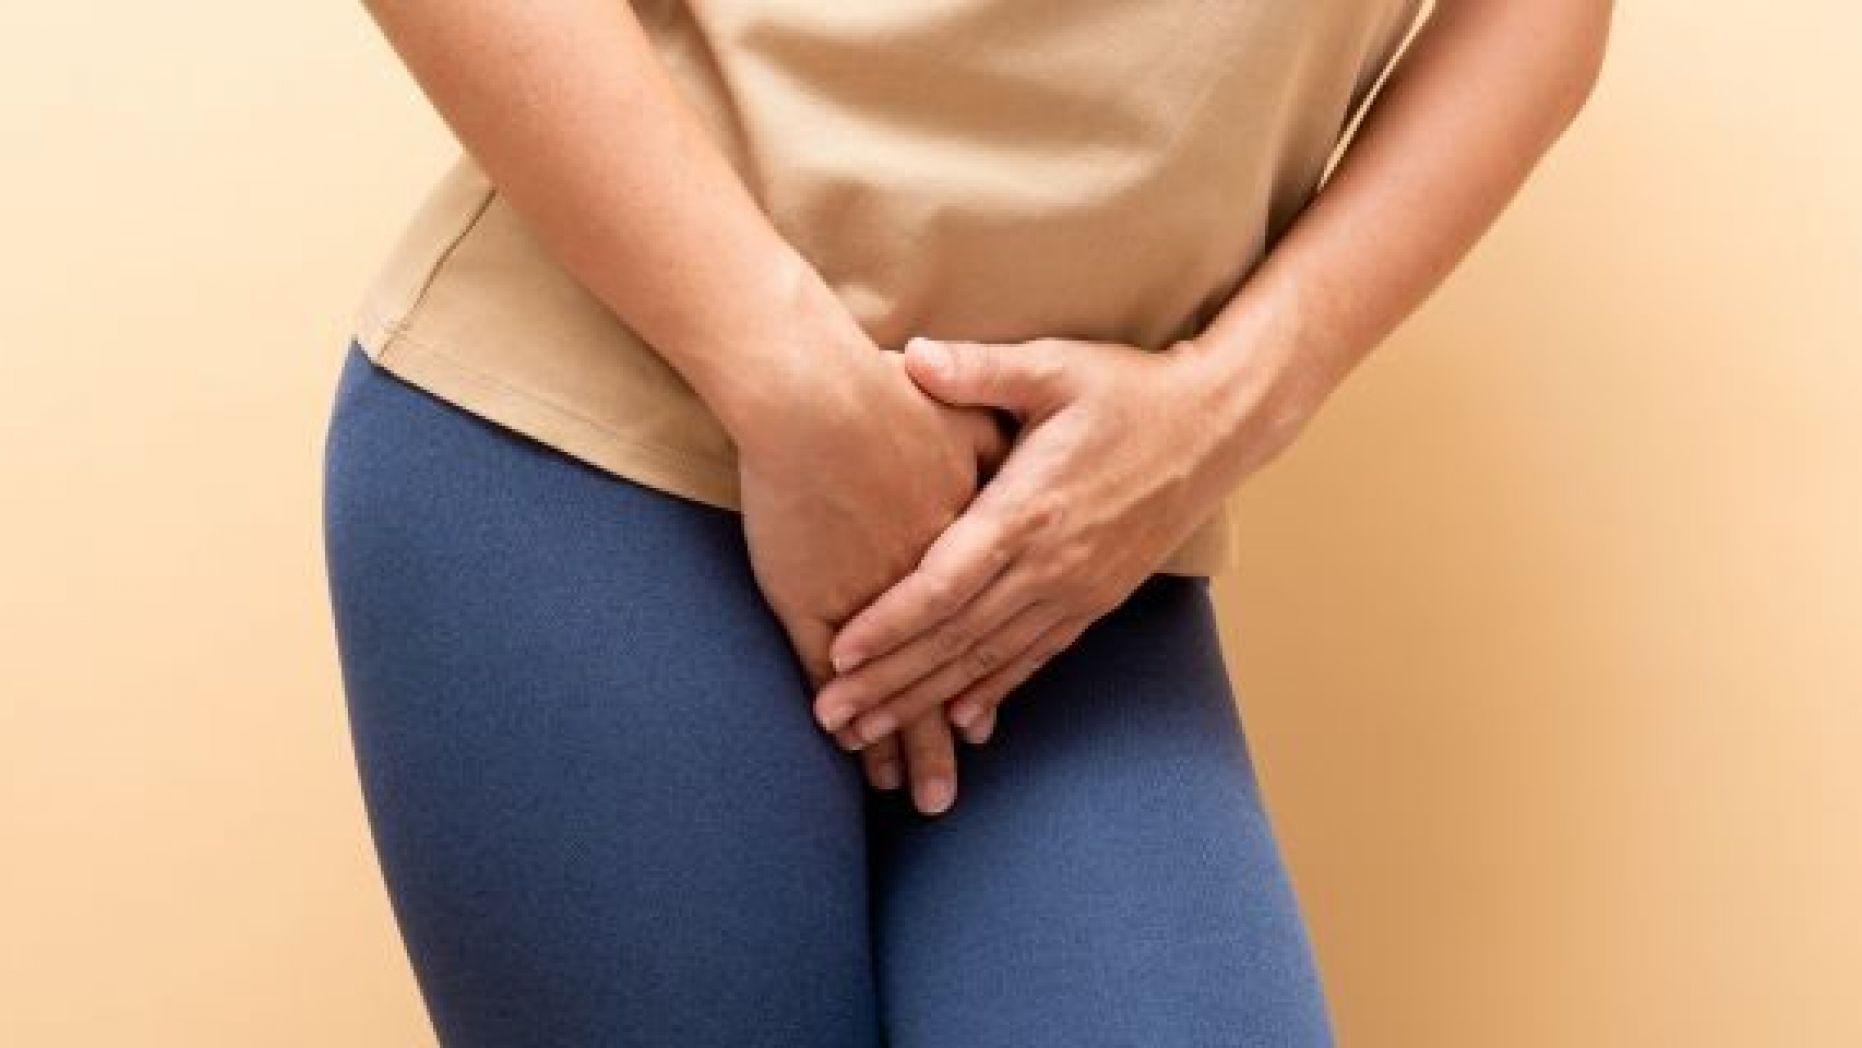 The symptoms of a UTI include burning during urination, cramps, blood in the urine, an urge to urinate frequently, and back pain. More intense infections might come with fevers and extreme fatigue. <br data-cke-eol="1">